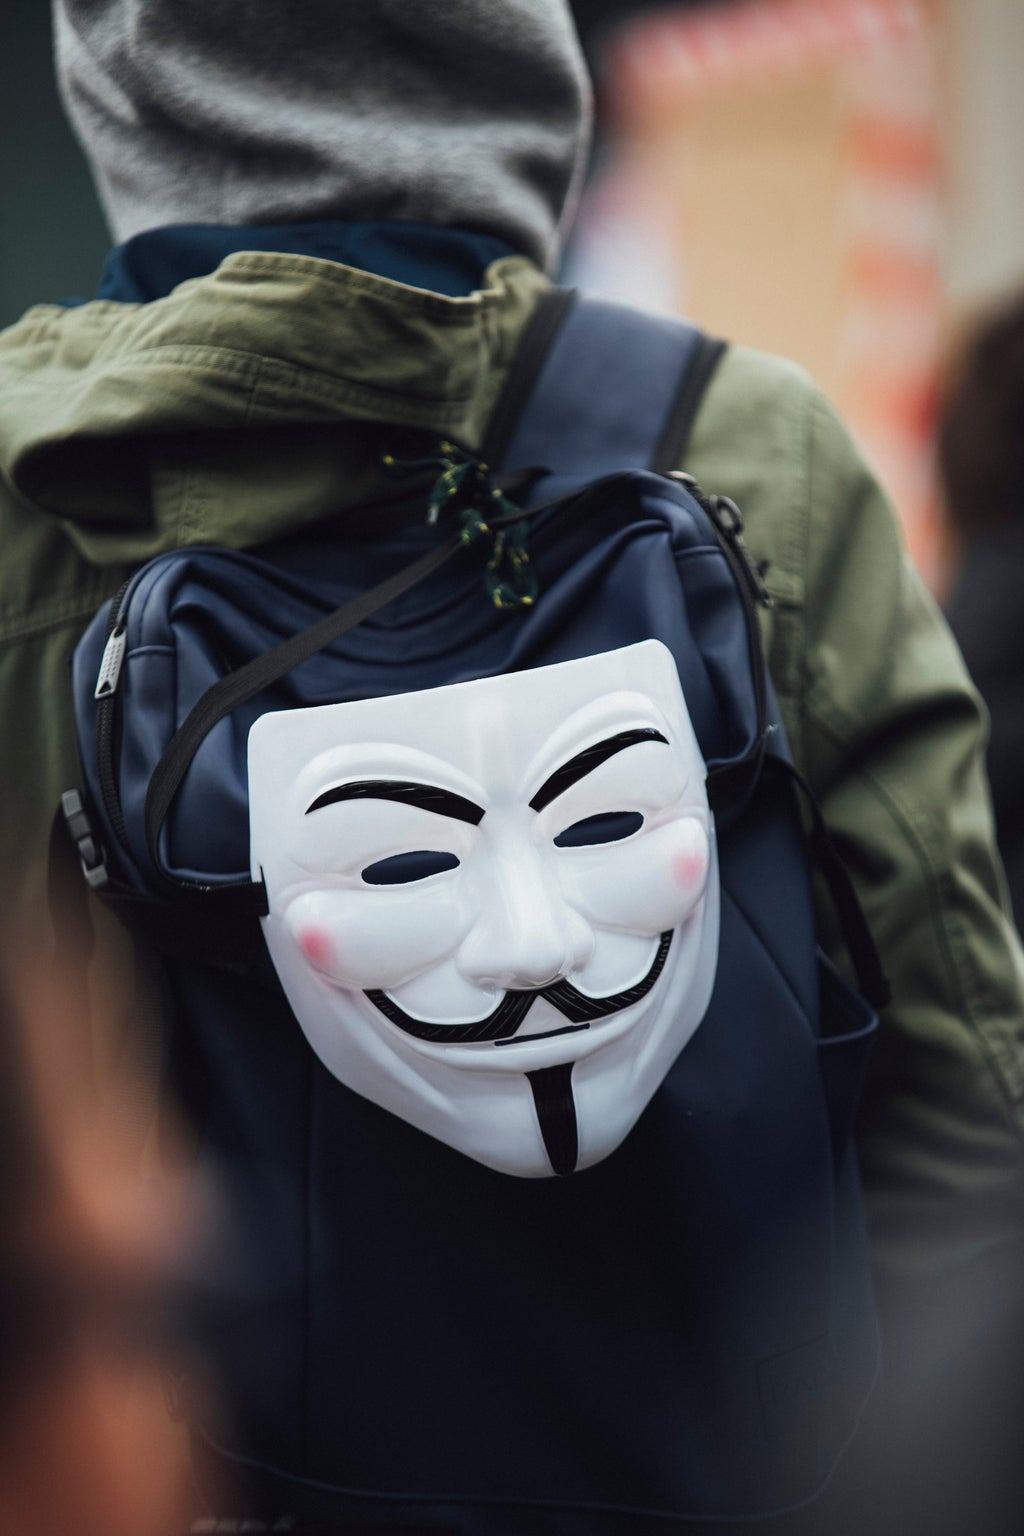 guy fawkes mask hanging off a backpack